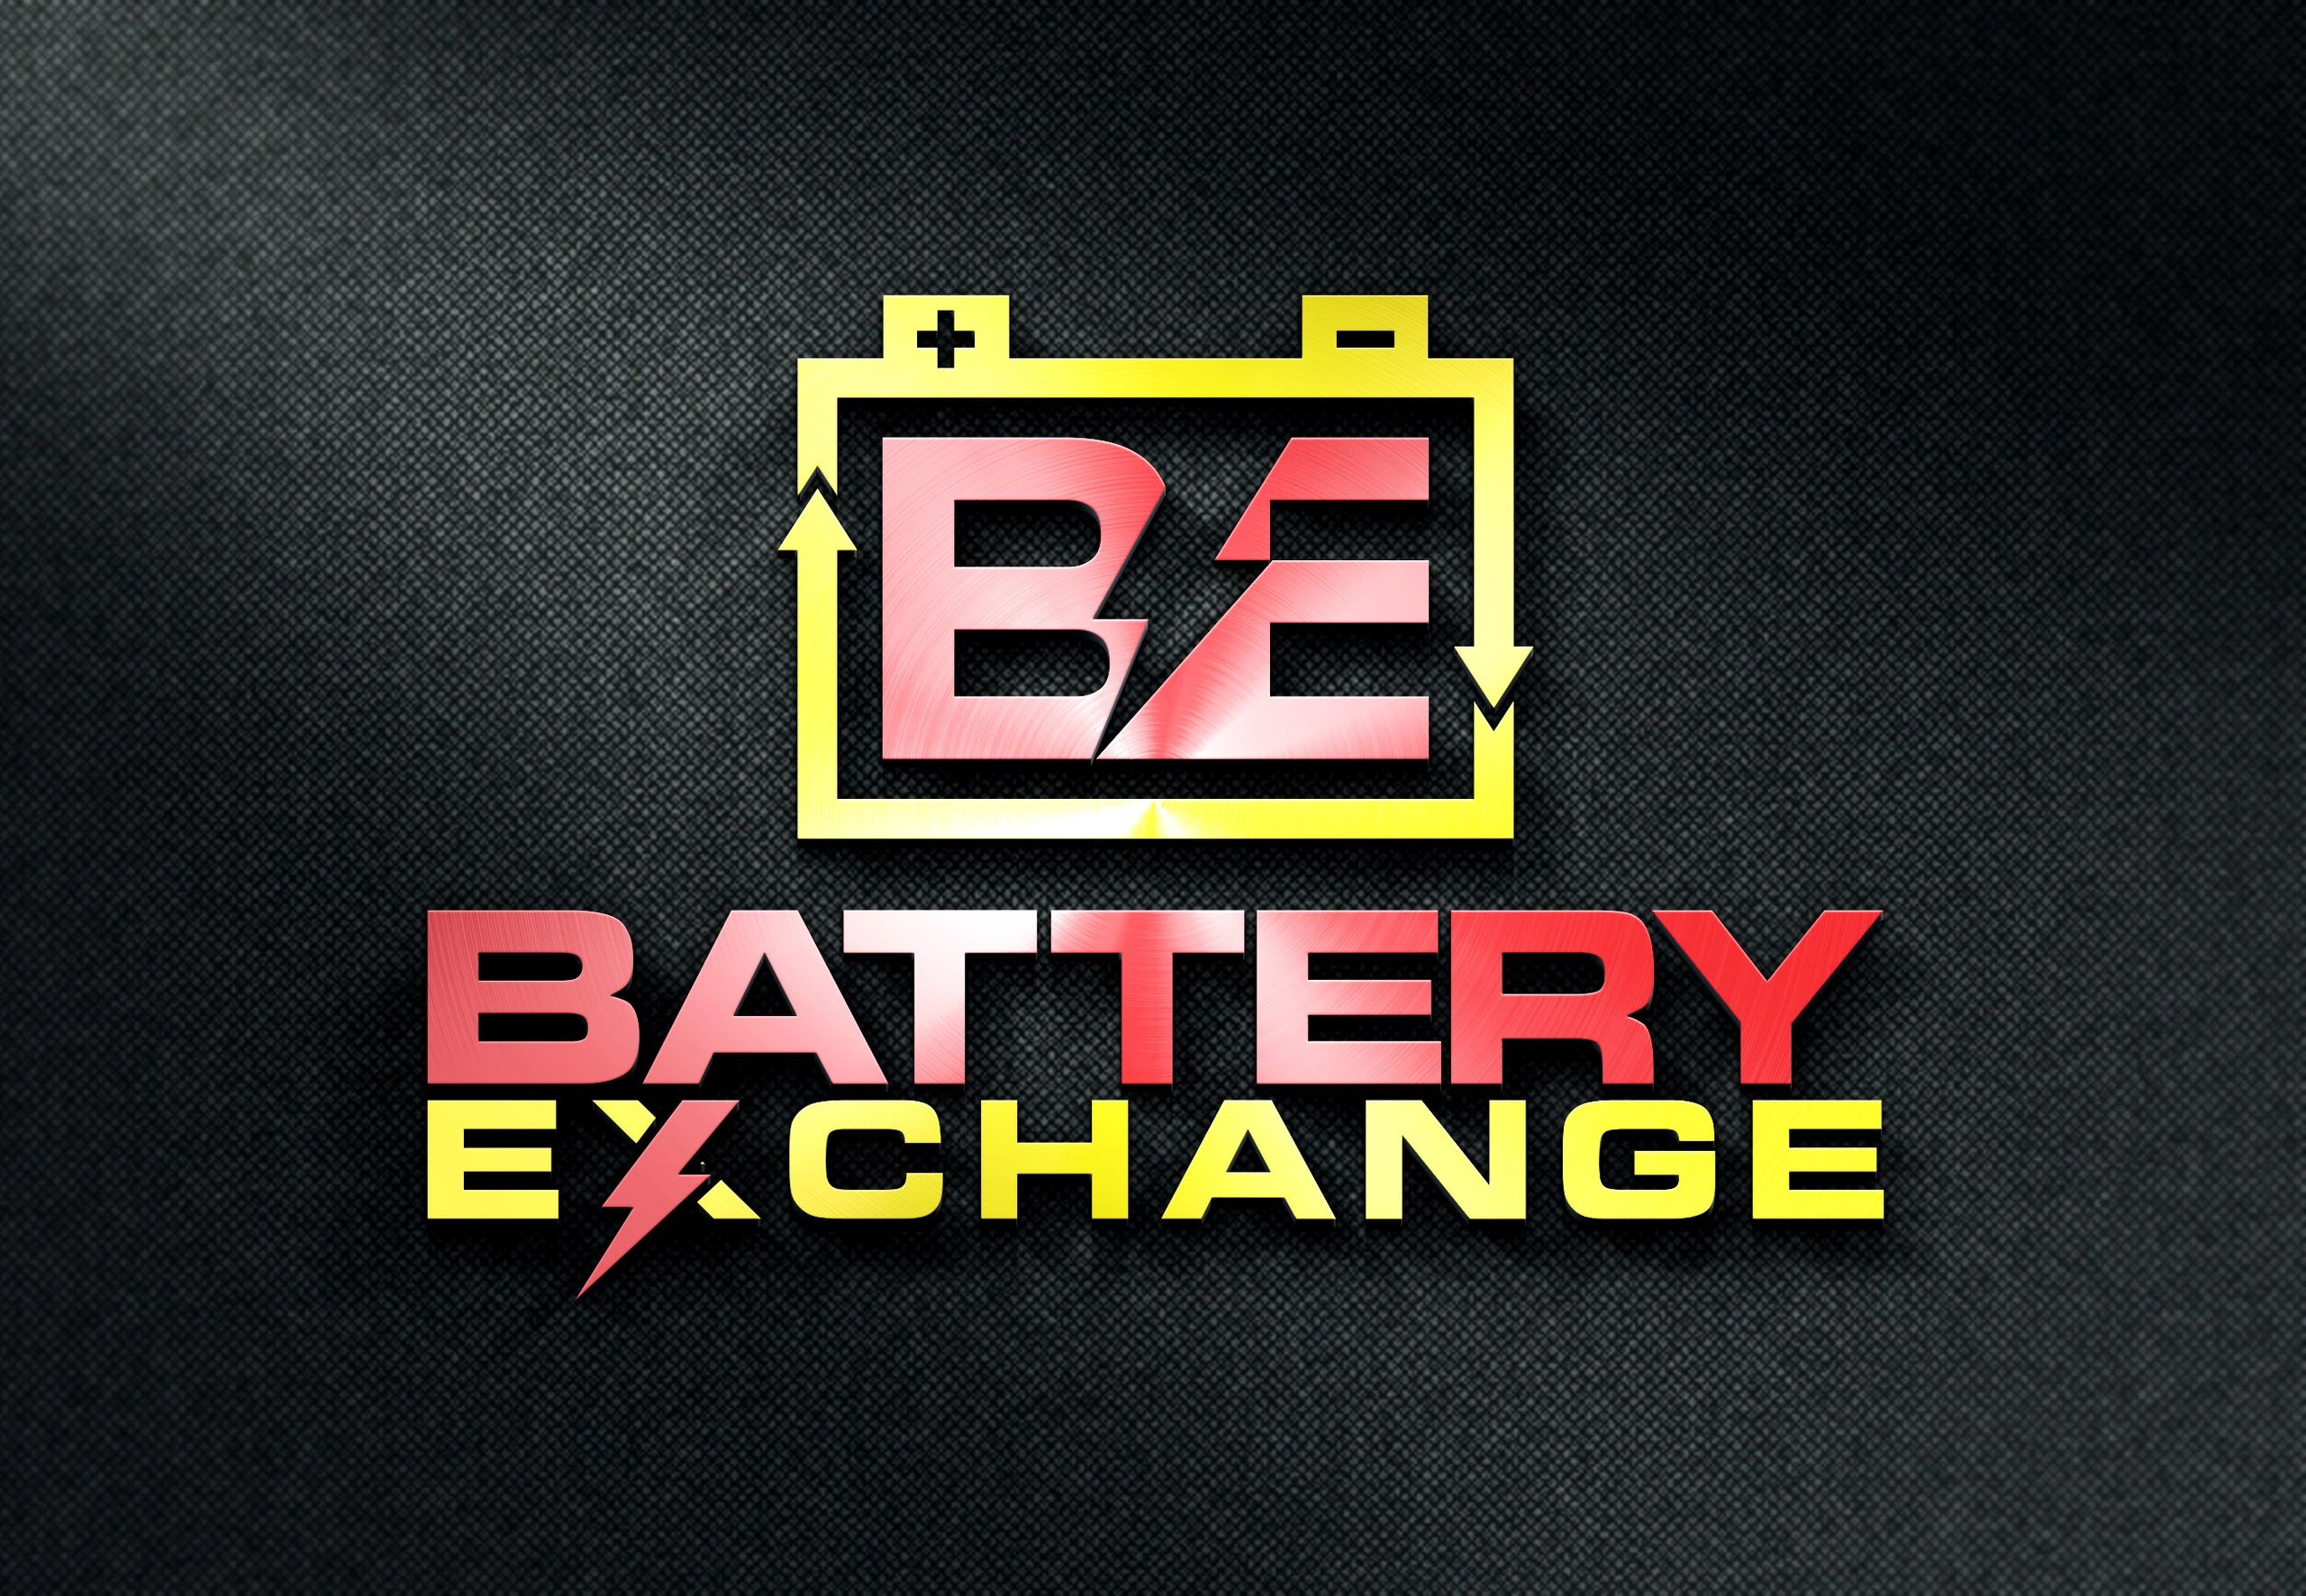 Batteries - The Battery Exchange